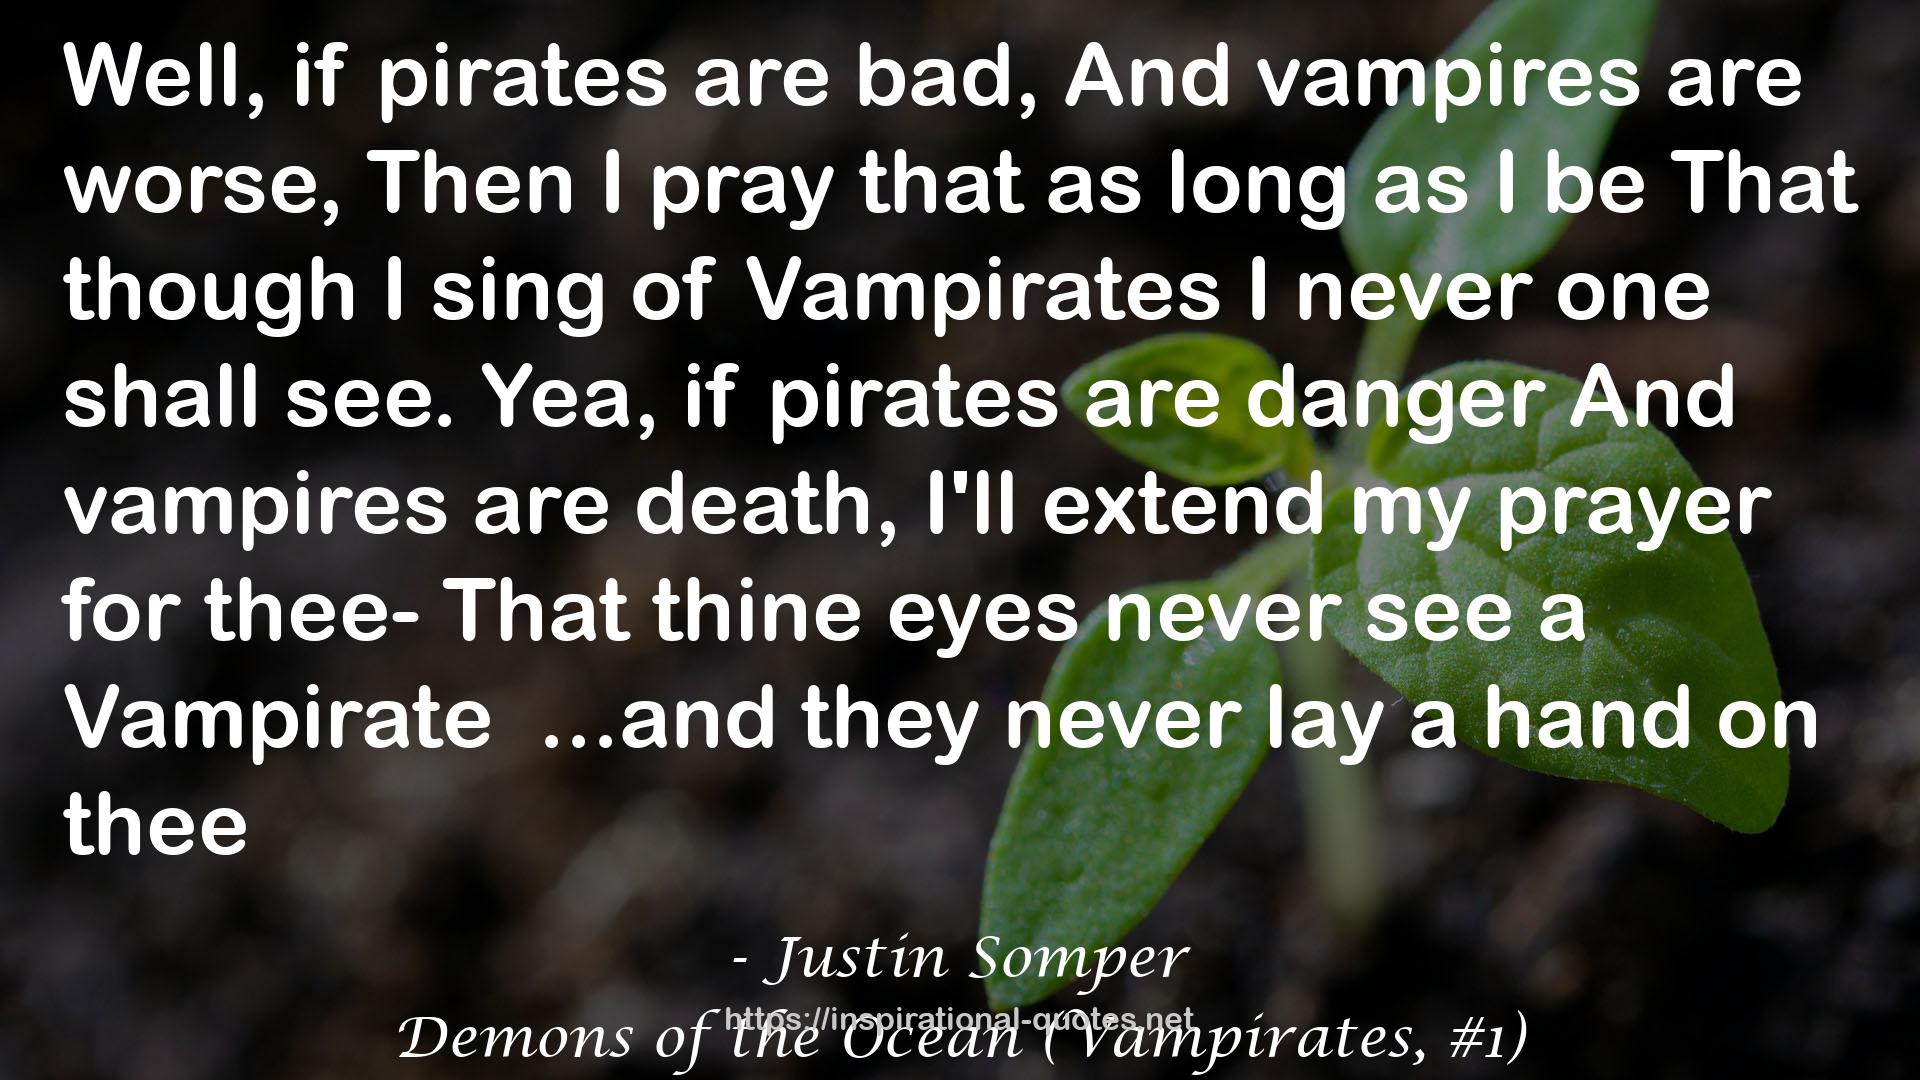 Demons of the Ocean (Vampirates, #1) QUOTES